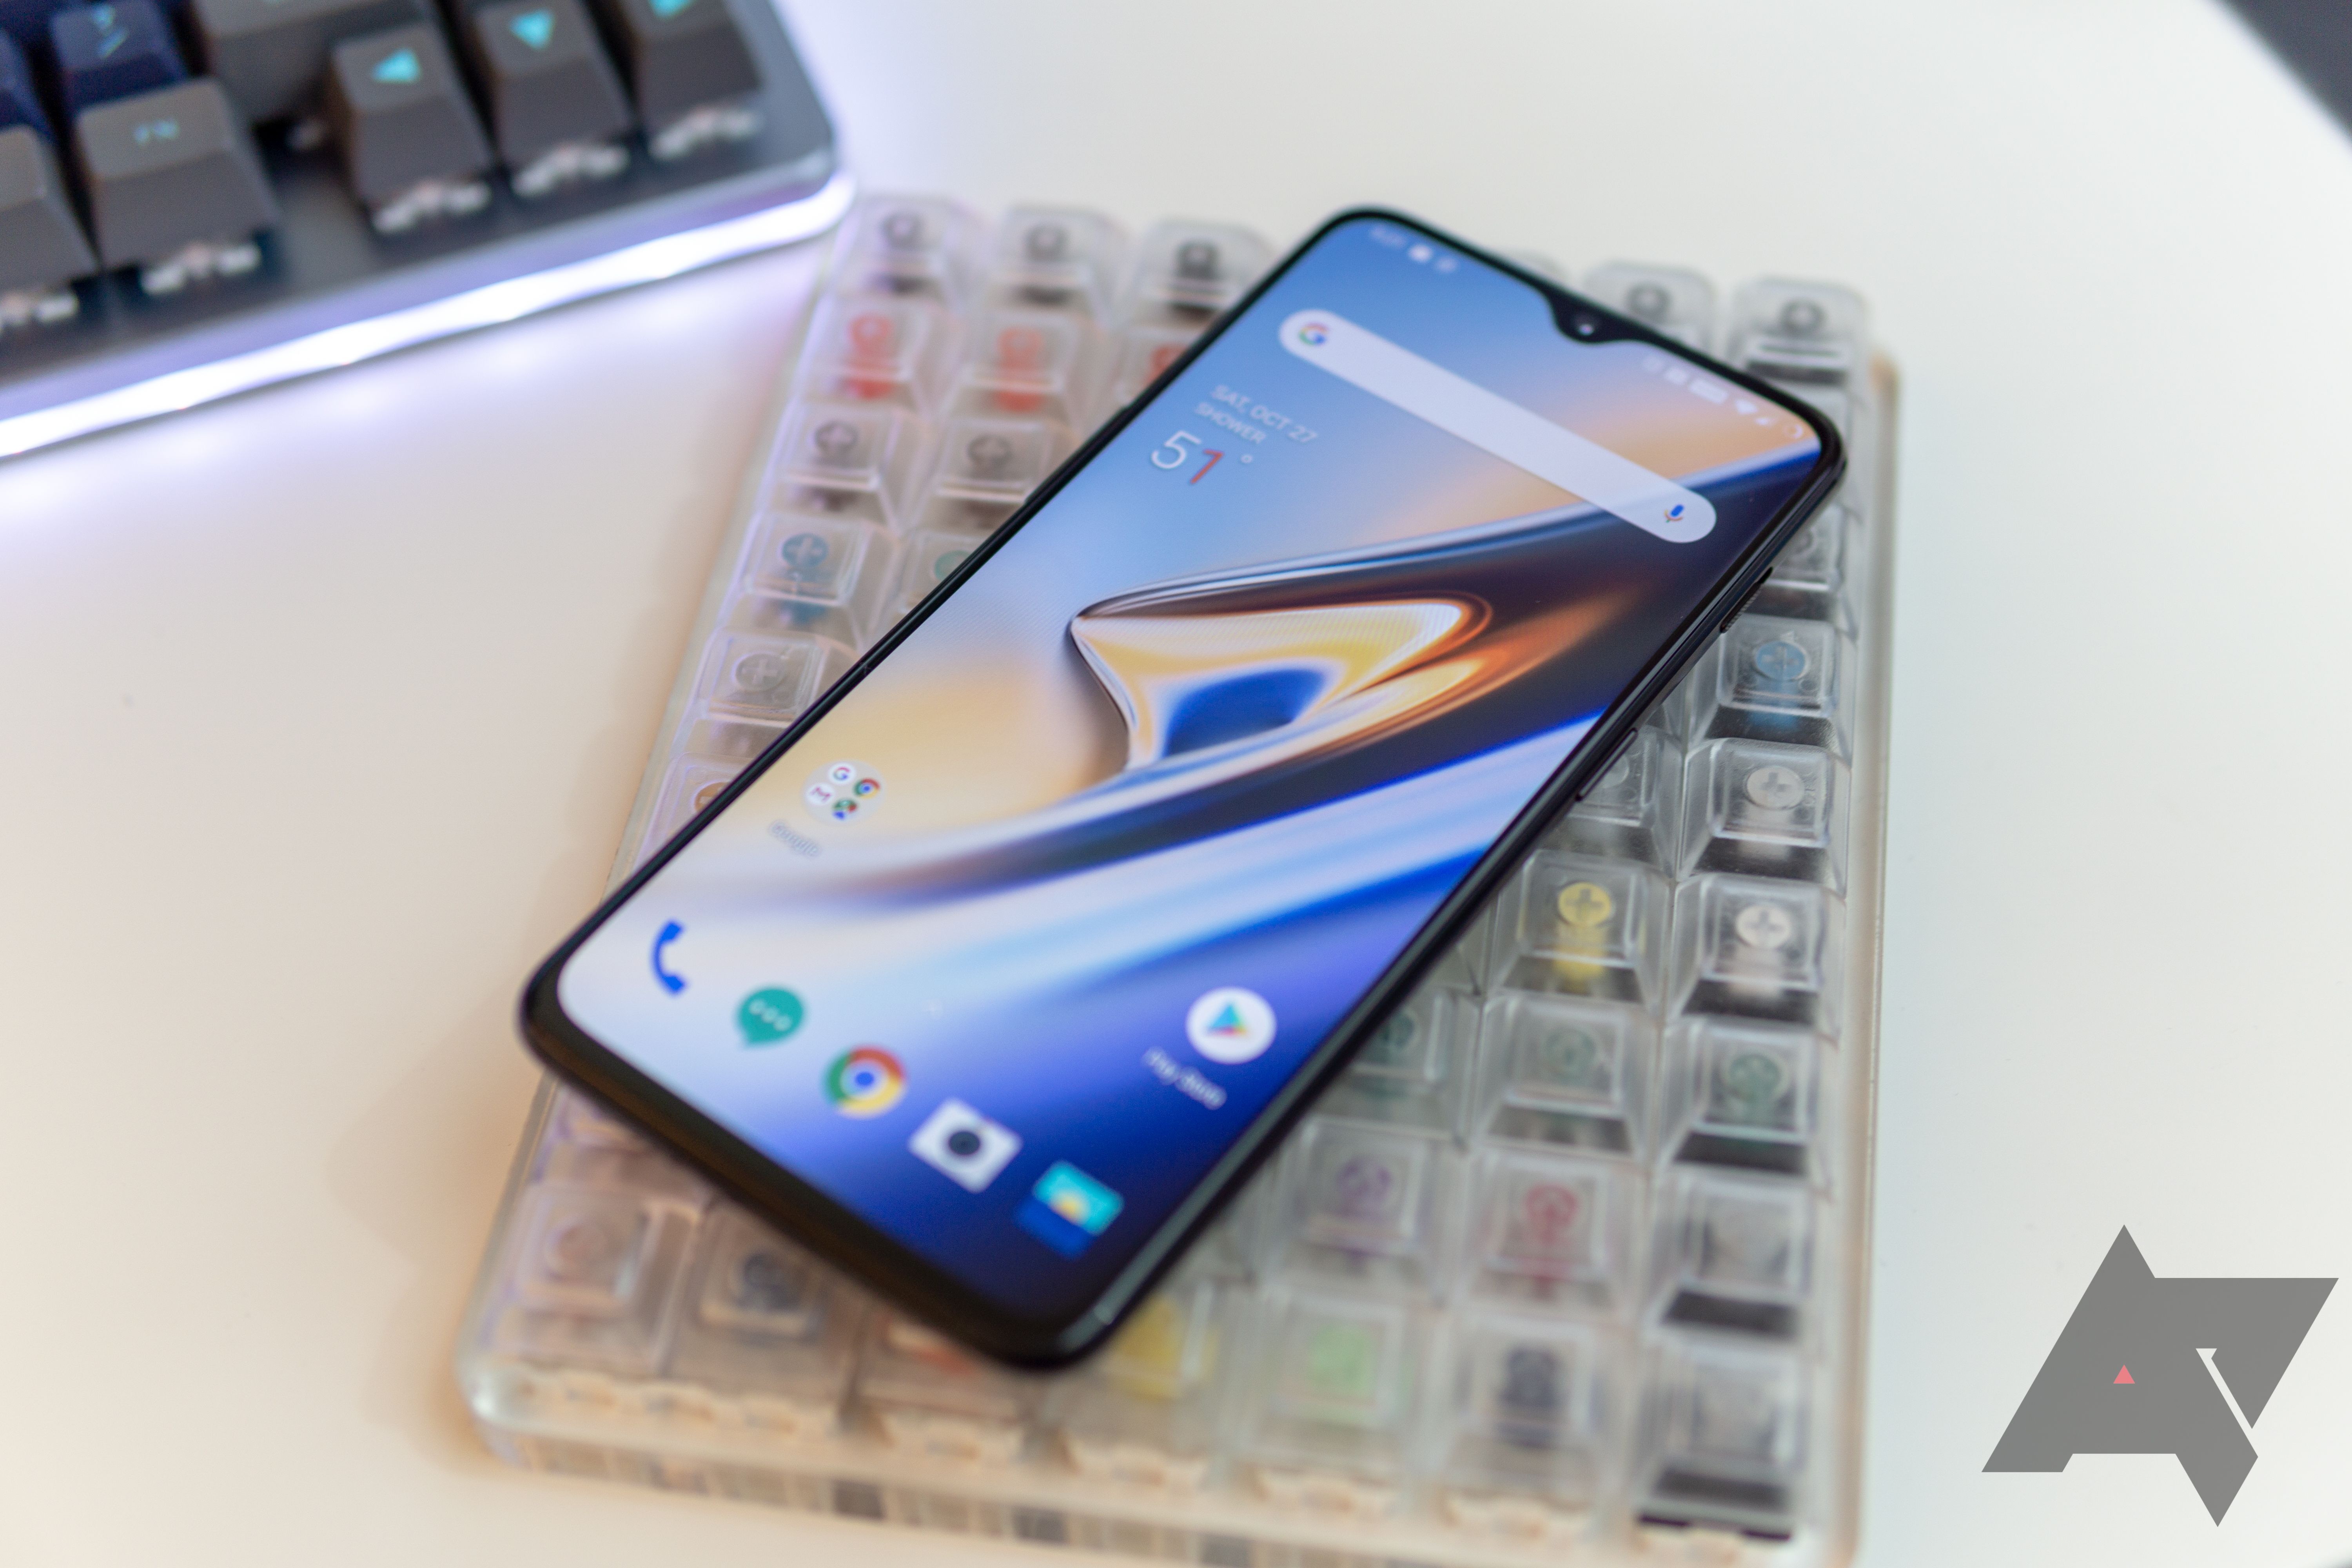 The OnePlus 6 as shown resting on a desk.